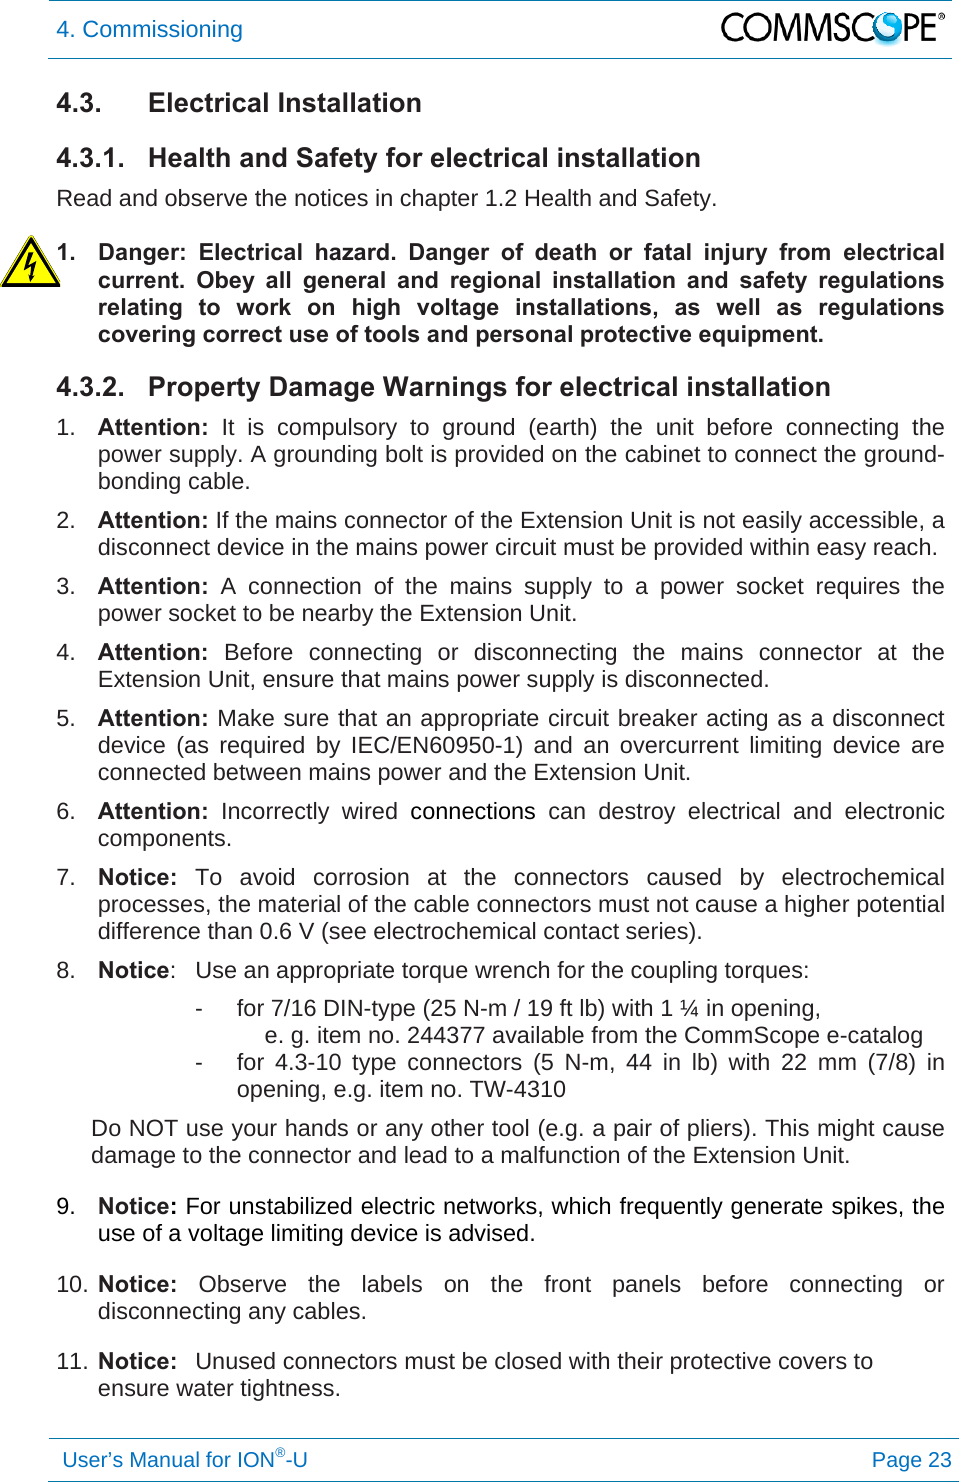 4. Commissioning   User’s Manual for ION®-U Page 23 4.3. Electrical Installation 4.3.1.  Health and Safety for electrical installation Read and observe the notices in chapter 1.2 Health and Safety.  1.  Danger: Electrical hazard. Danger of death or fatal injury from electrical current. Obey all general and regional installation and safety regulations relating to work on high voltage installations, as well as regulations covering correct use of tools and personal protective equipment. 4.3.2.  Property Damage Warnings for electrical installation 1.  Attention: It is compulsory to ground (earth) the unit before connecting the power supply. A grounding bolt is provided on the cabinet to connect the ground-bonding cable. 2.  Attention: If the mains connector of the Extension Unit is not easily accessible, a disconnect device in the mains power circuit must be provided within easy reach. 3.  Attention: A connection of the mains supply to a power socket requires the power socket to be nearby the Extension Unit. 4.  Attention:  Before connecting or disconnecting the mains connector at the Extension Unit, ensure that mains power supply is disconnected. 5.  Attention: Make sure that an appropriate circuit breaker acting as a disconnect device (as required by IEC/EN60950-1) and an overcurrent limiting device are connected between mains power and the Extension Unit. 6.  Attention: Incorrectly wired connections can destroy electrical and electronic components. 7.  Notice: To avoid corrosion at the connectors caused by electrochemical processes, the material of the cable connectors must not cause a higher potential difference than 0.6 V (see electrochemical contact series). 8.  Notice:  Use an appropriate torque wrench for the coupling torques:   -  for 7/16 DIN-type (25 N-m / 19 ft lb) with 1 ¼ in opening,  e. g. item no. 244377 available from the CommScope e-catalog -  for 4.3-10 type connectors (5 N-m, 44 in lb) with 22 mm (7/8) in opening, e.g. item no. TW-4310 Do NOT use your hands or any other tool (e.g. a pair of pliers). This might cause damage to the connector and lead to a malfunction of the Extension Unit. 9.  Notice: For unstabilized electric networks, which frequently generate spikes, the use of a voltage limiting device is advised. 10. Notice: Observe the labels on the front panels before connecting or disconnecting any cables. 11. Notice:  Unused connectors must be closed with their protective covers to ensure water tightness.   